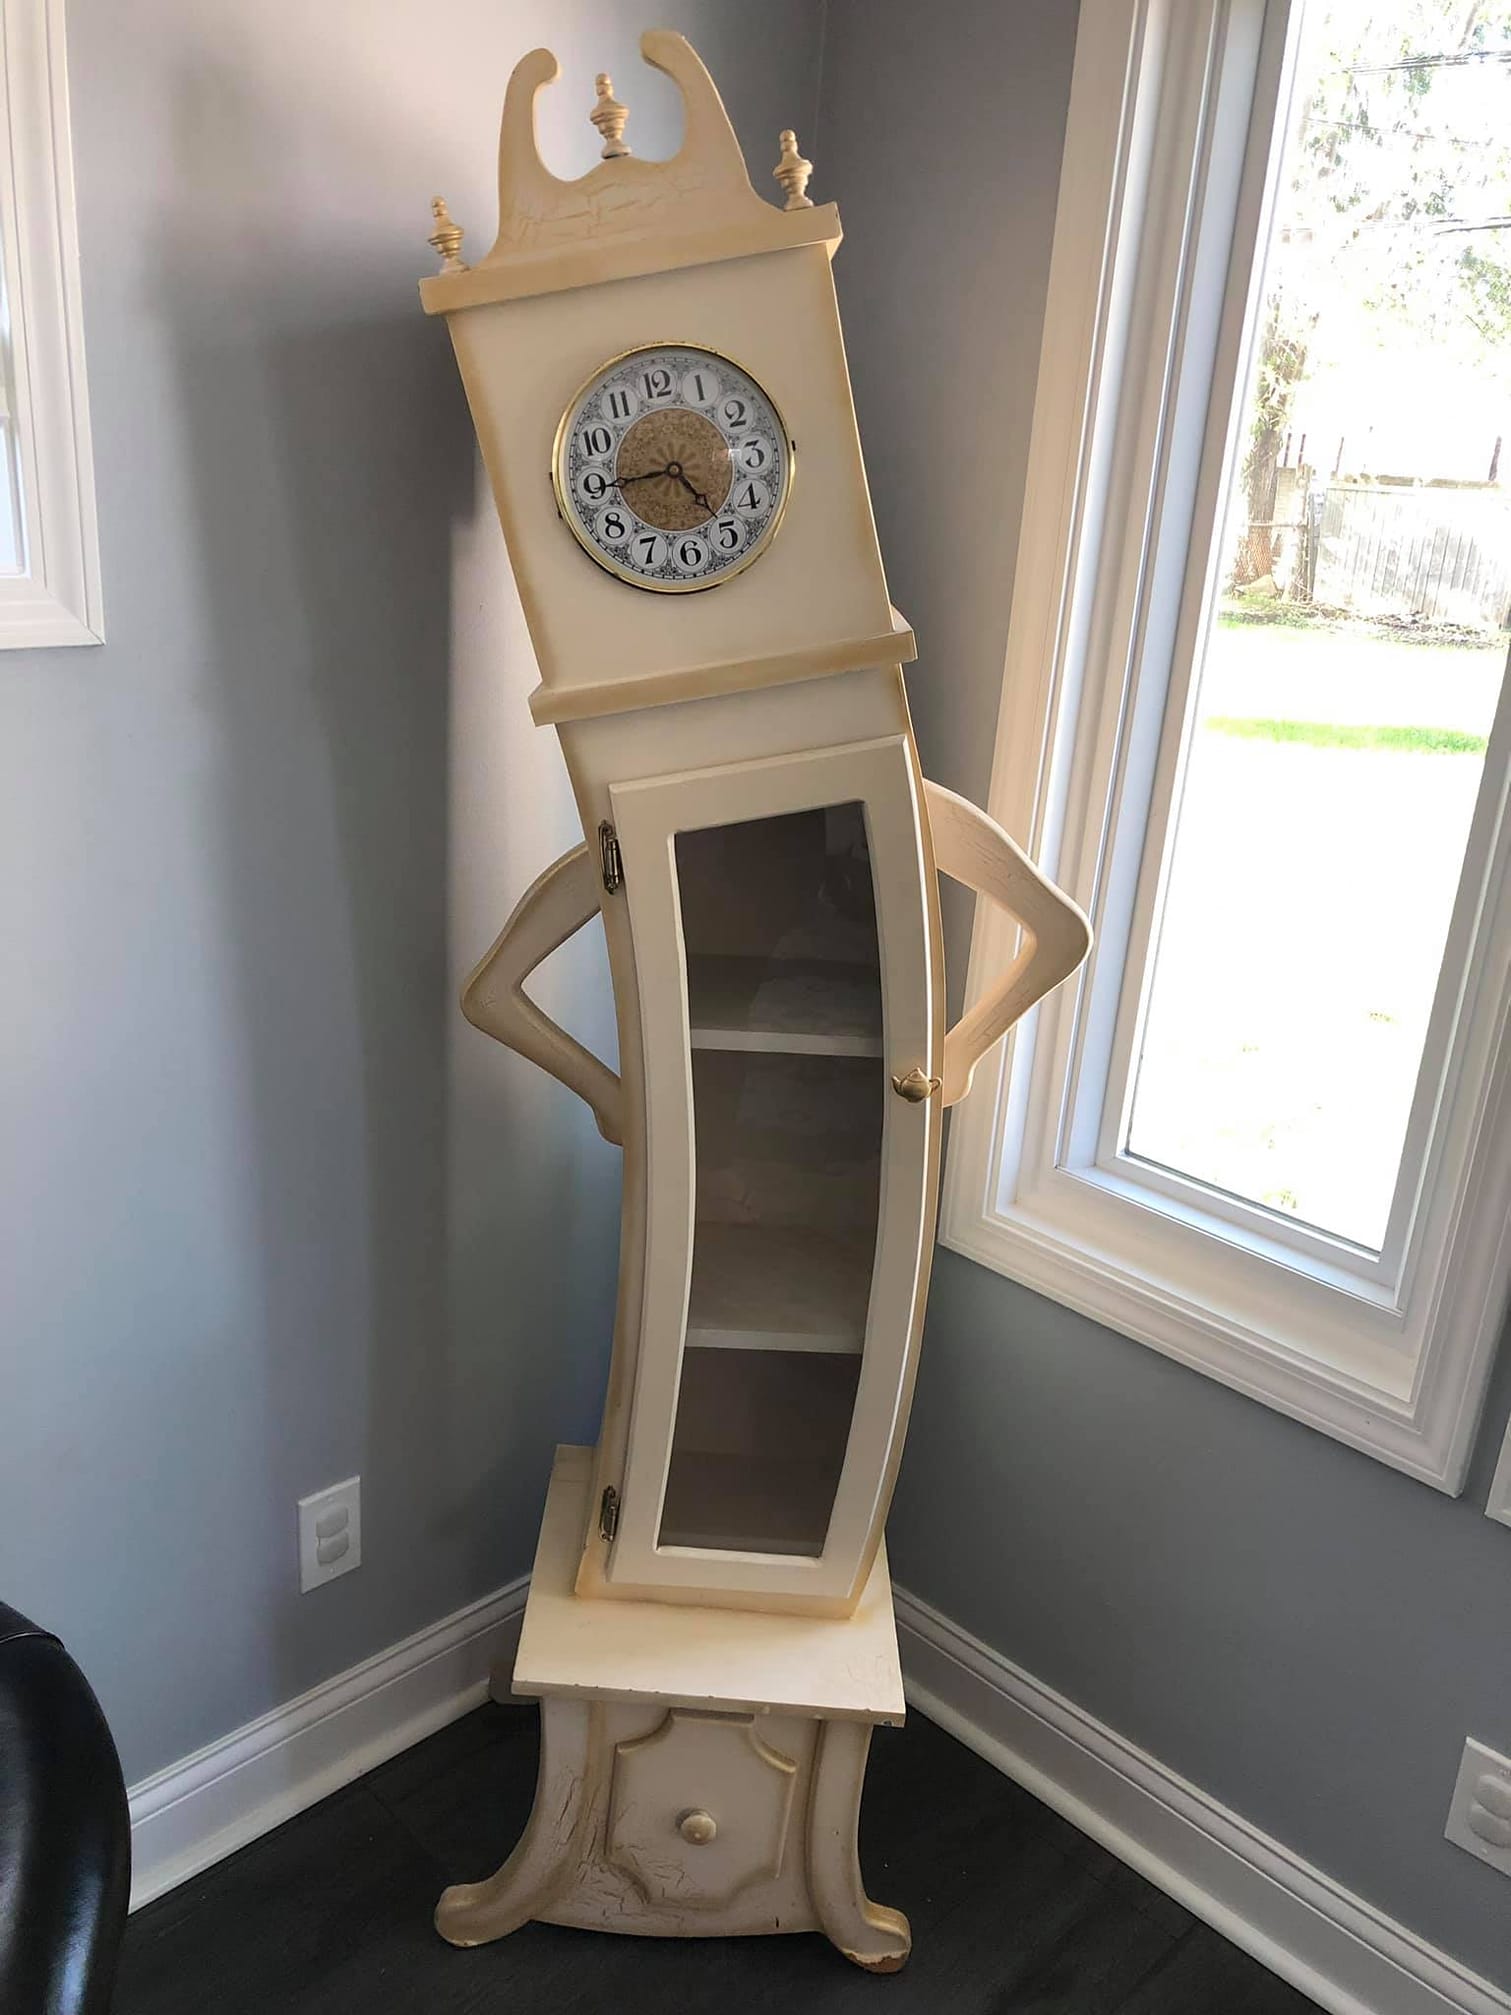 Grandfather Clocks A Whimsical Grandfather Clock With a Sassy Stance